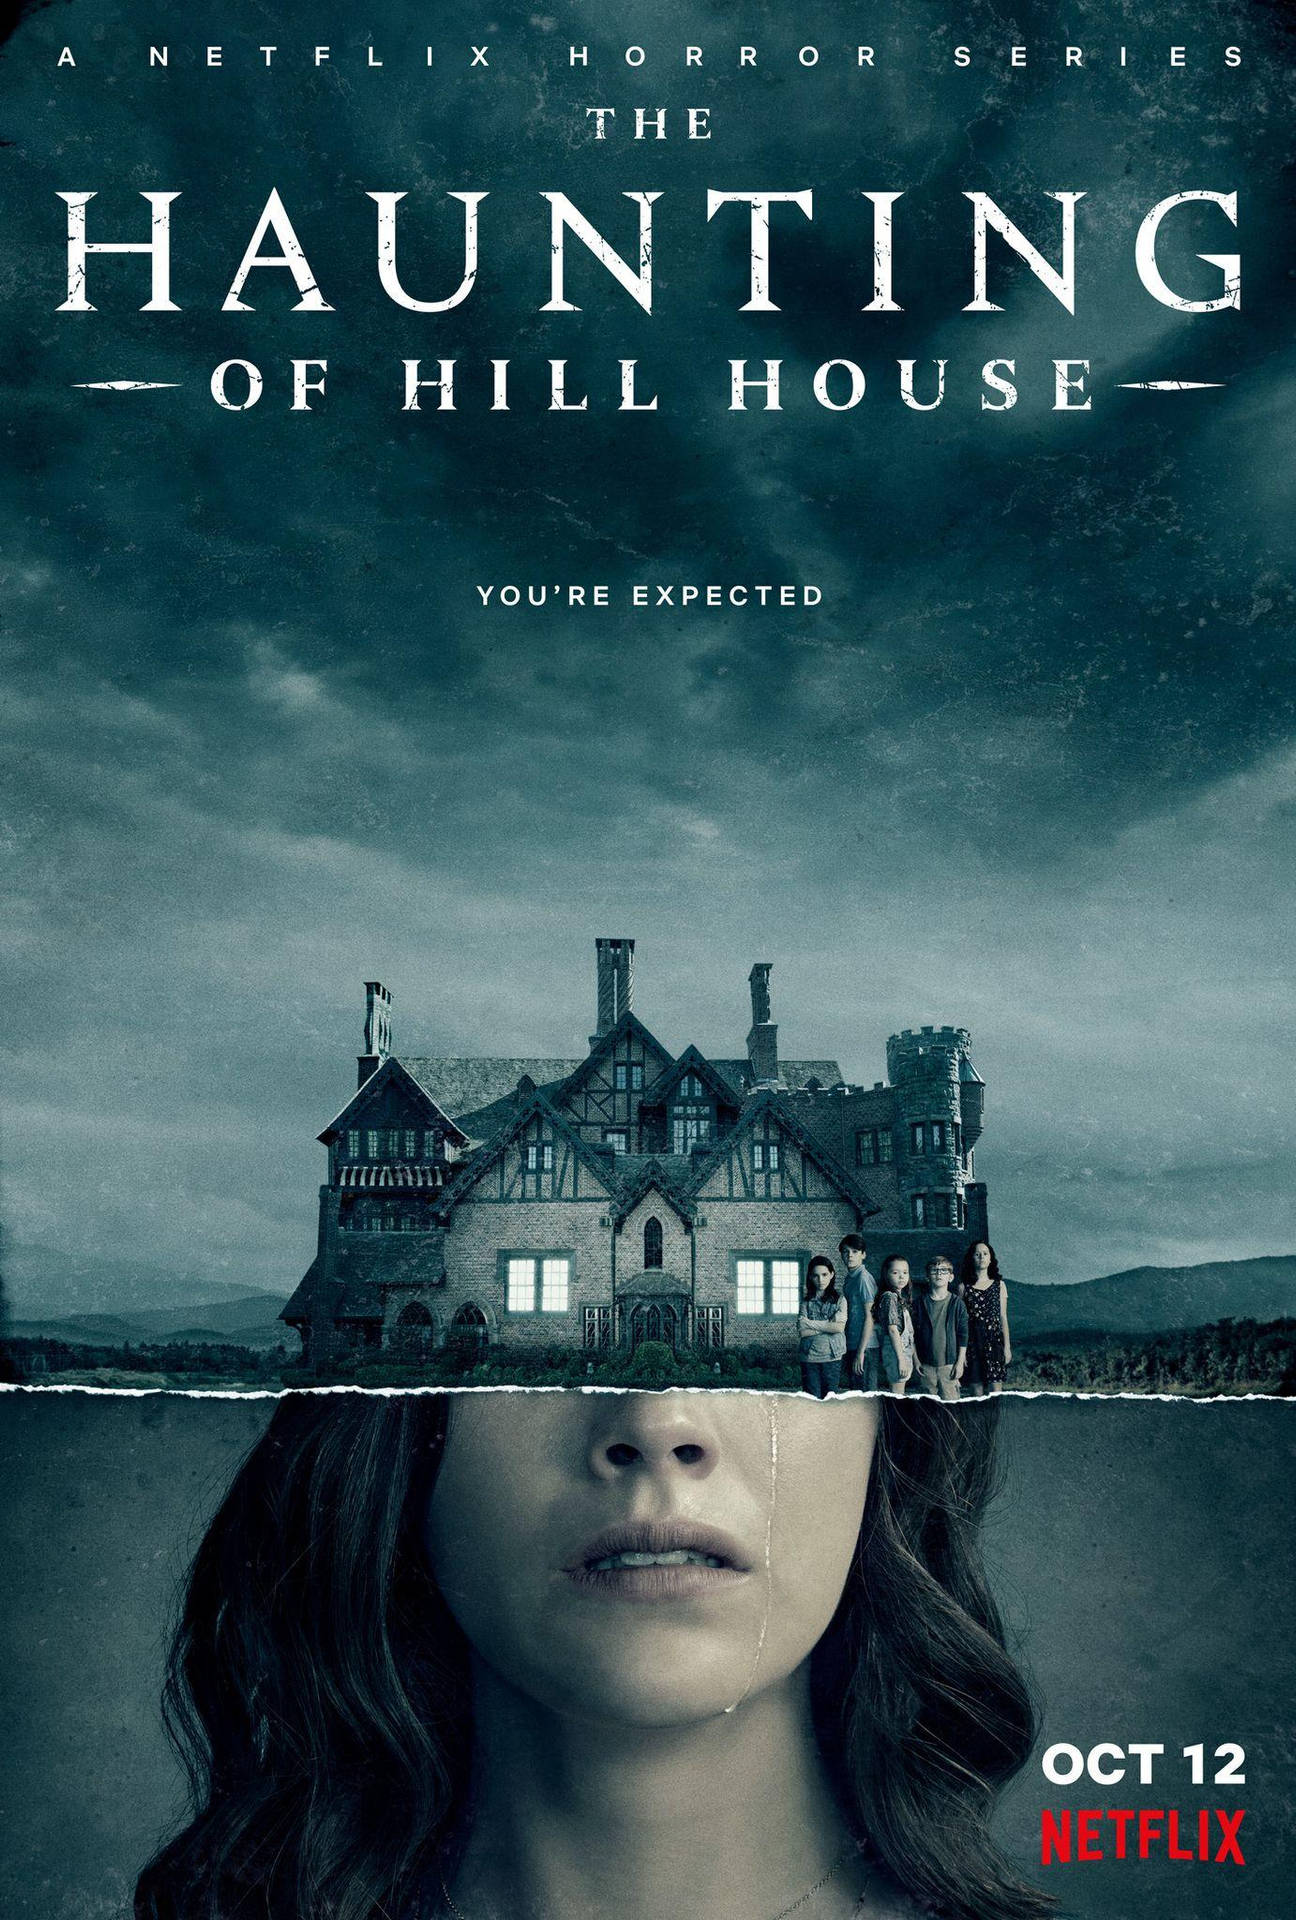 The Haunting Of Hill House Horror Series Background